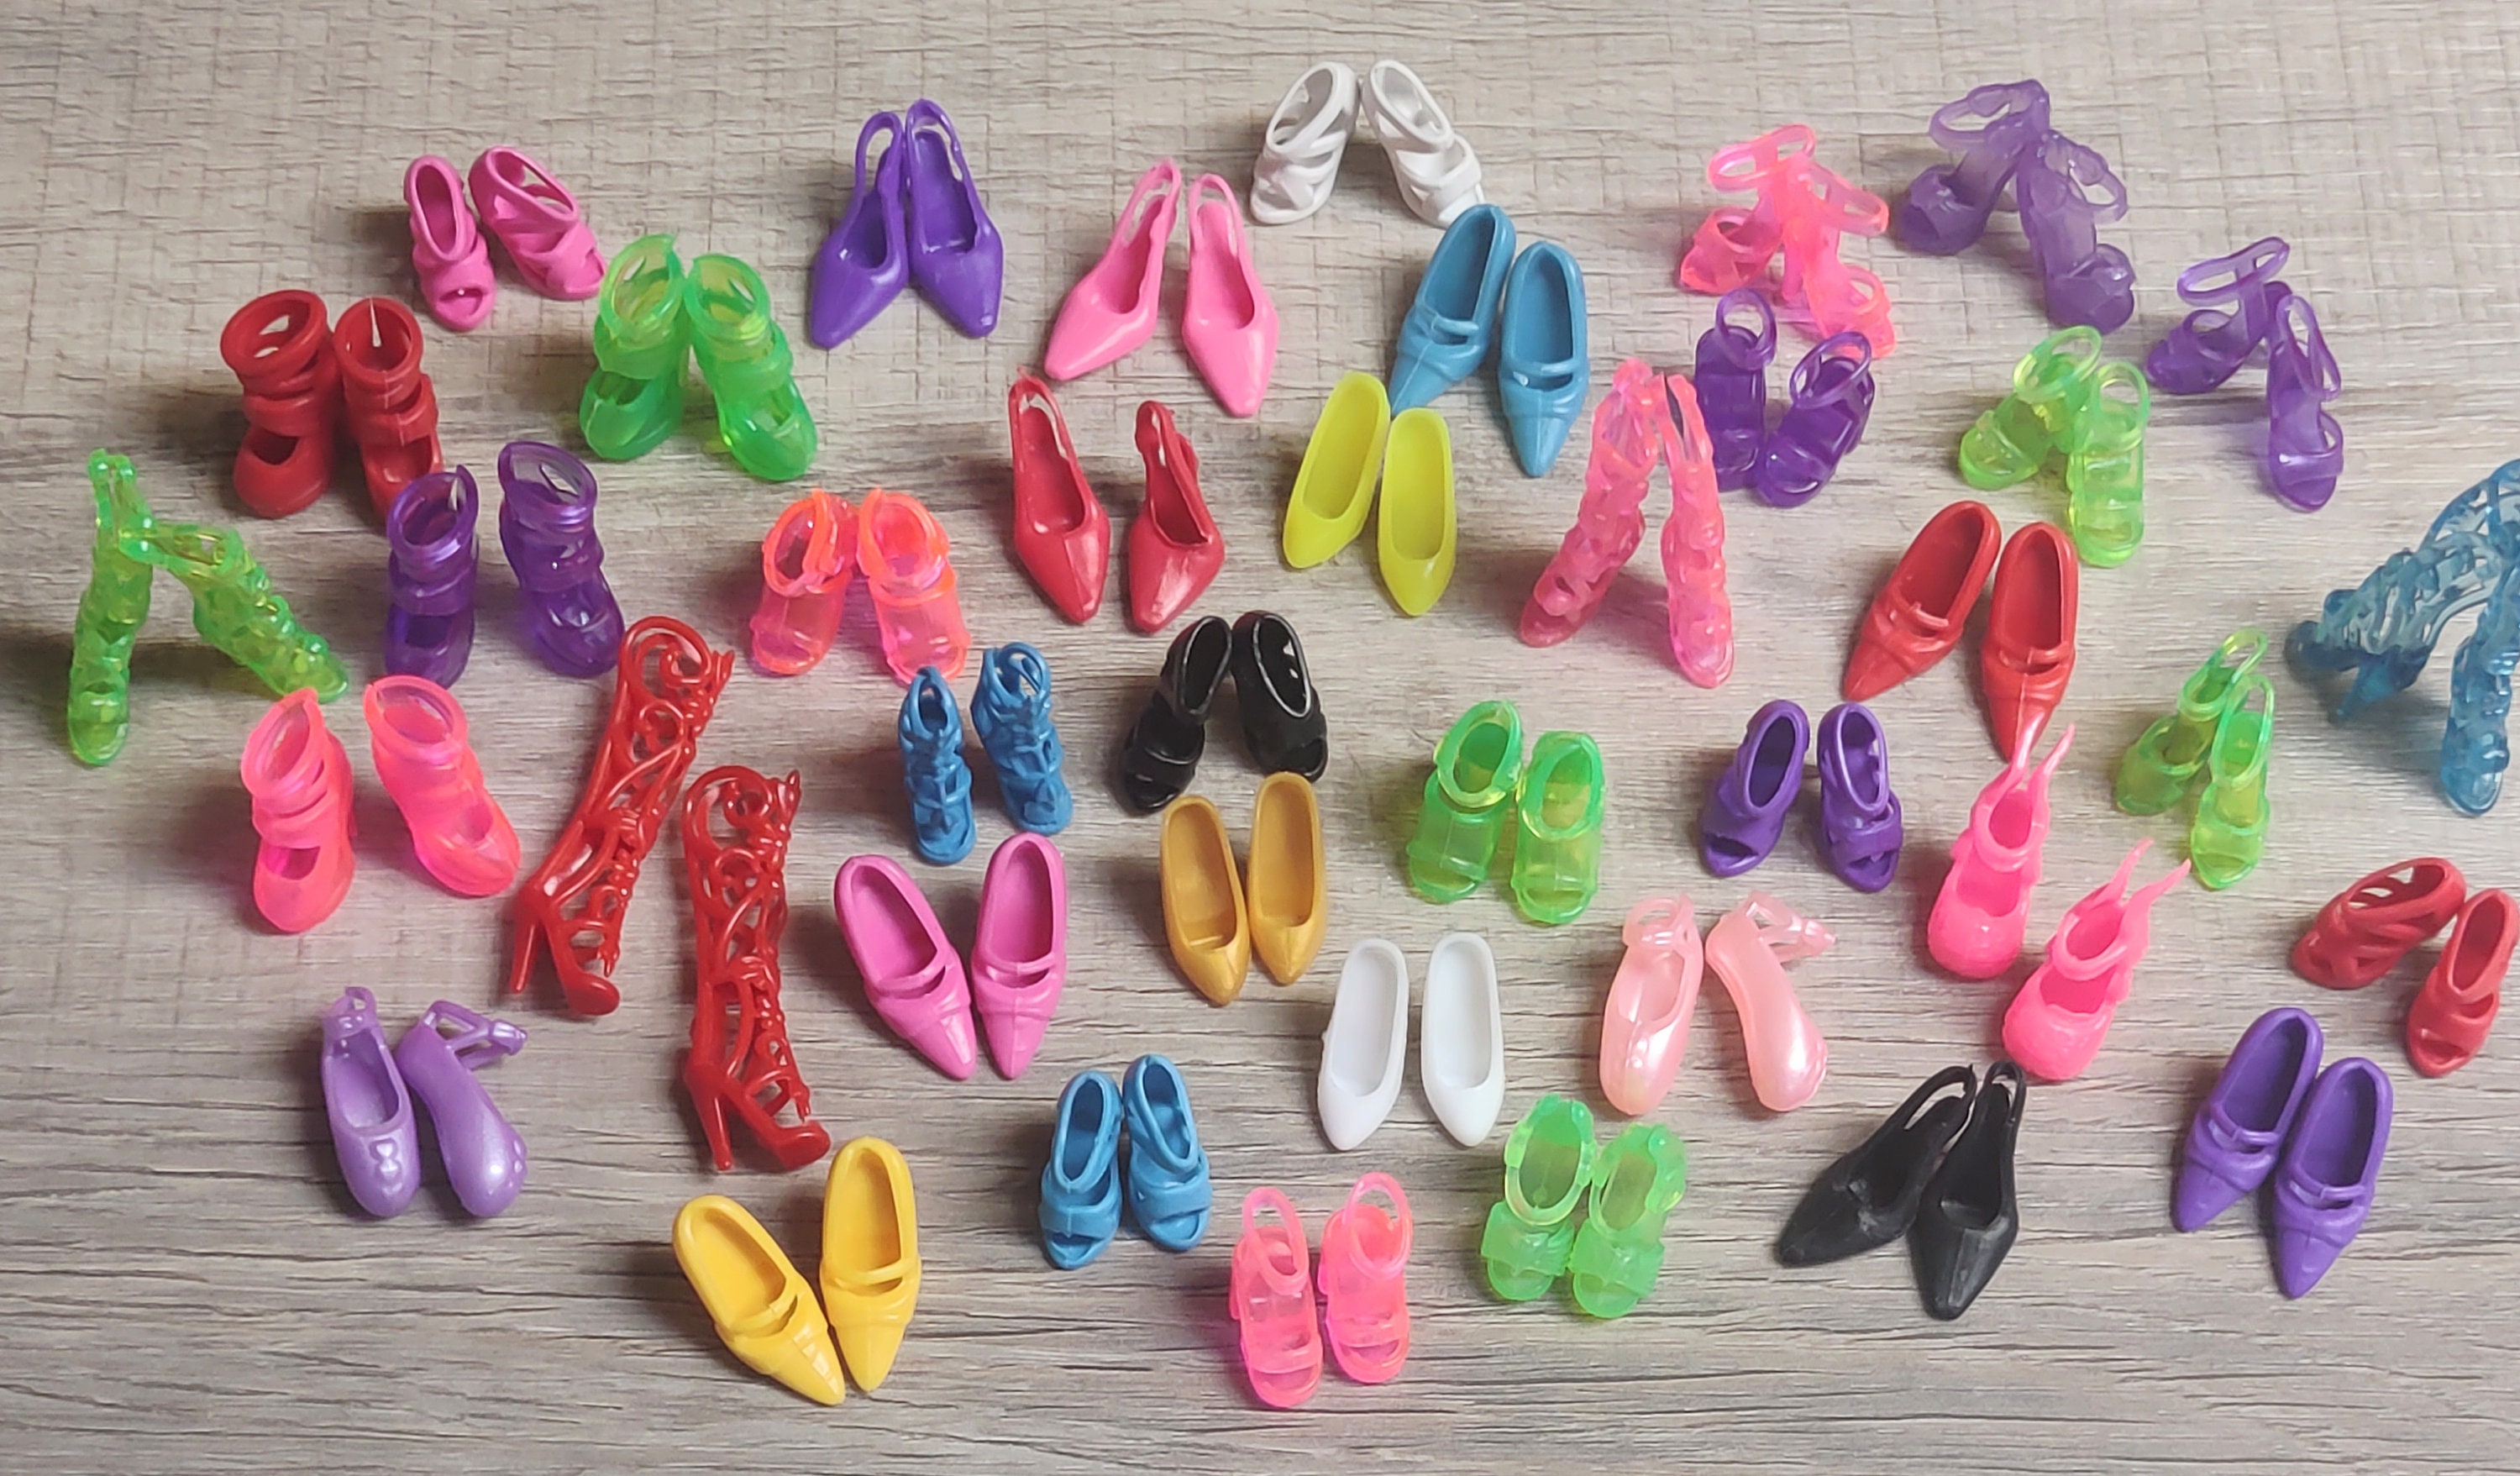 Barbie Doll Shoes Lot Of 20 New Pairs Of Assorted Shoes US Seller 